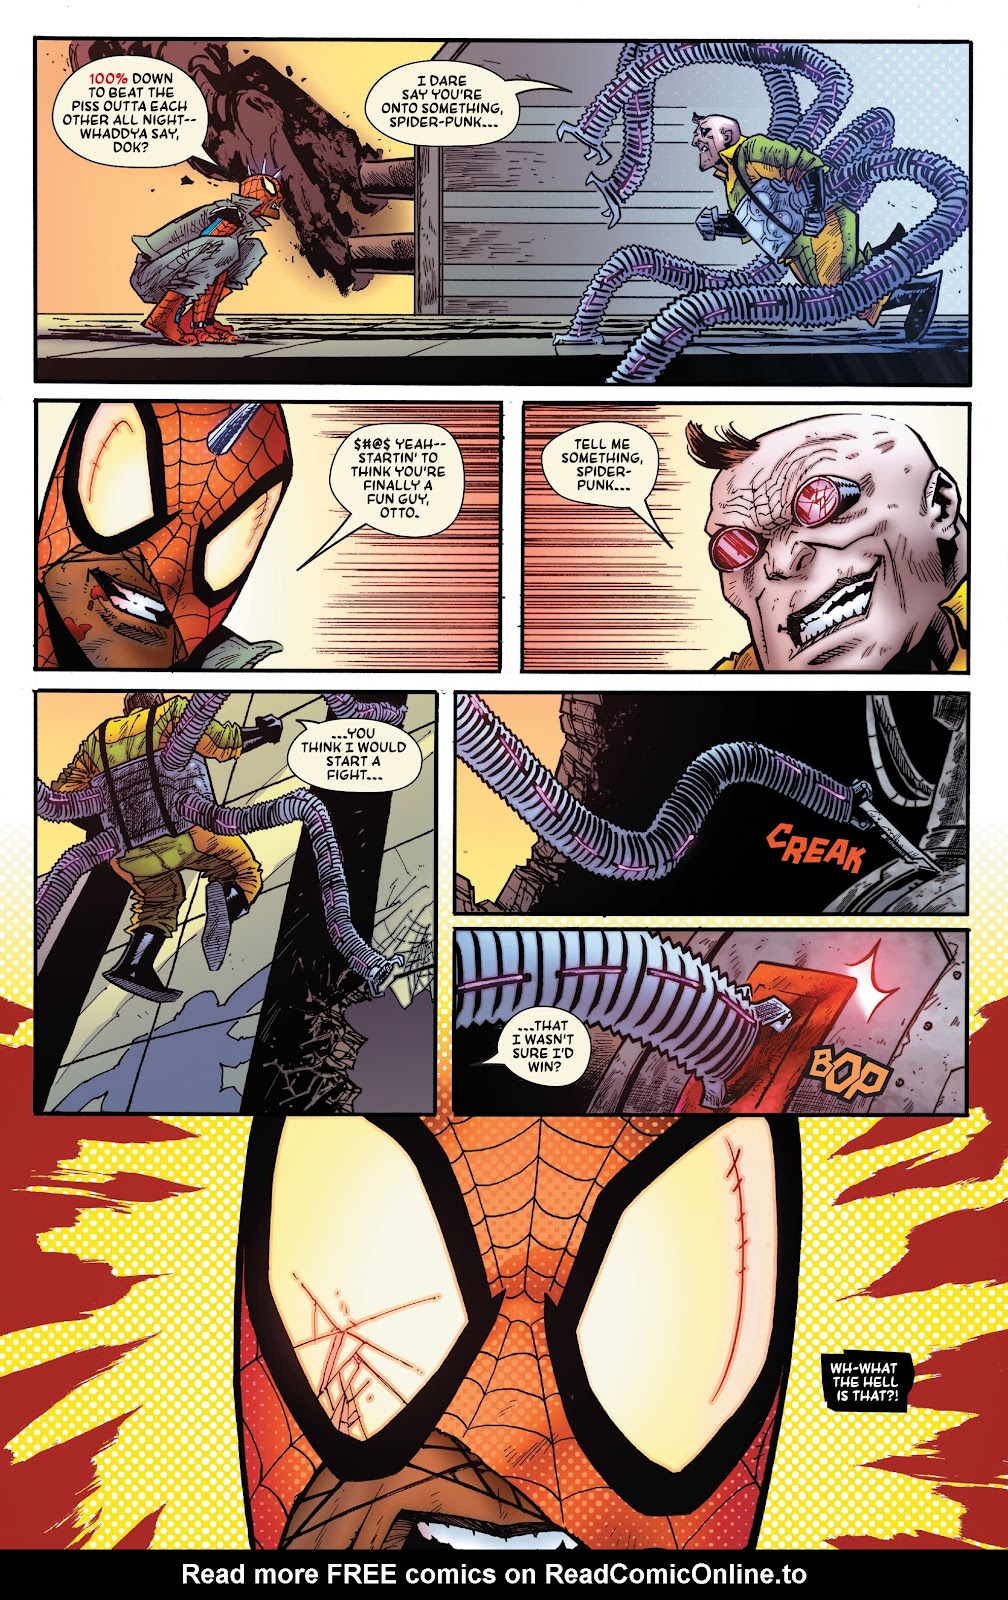 Spider-Punk: Arms Race issue 3 - Page 17